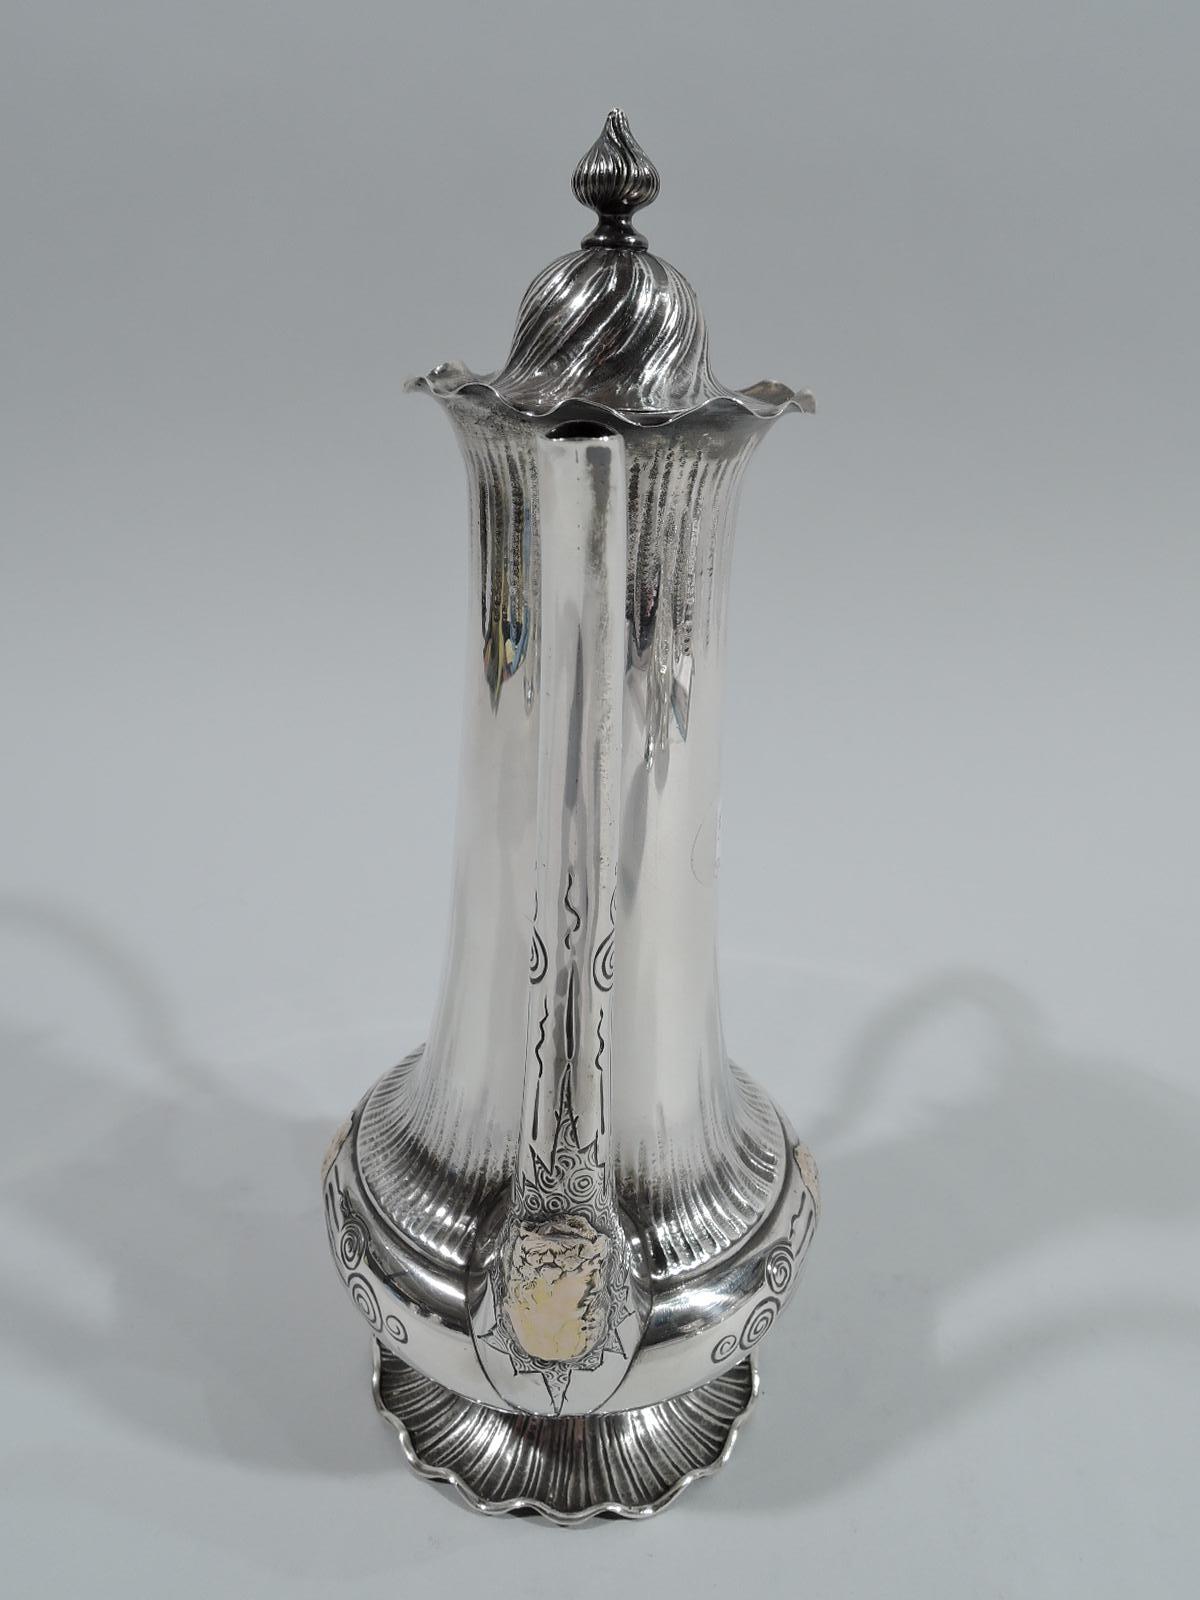 Medallion sterling silver Turkish coffeepot. Made by George W. Shiebler & Co. in New York, ca 1890. Gently upward tapering cylindrical neck flowing into bellied bowl on round and raised foot with wavy rim. Vertical s-scroll spout and high-looping